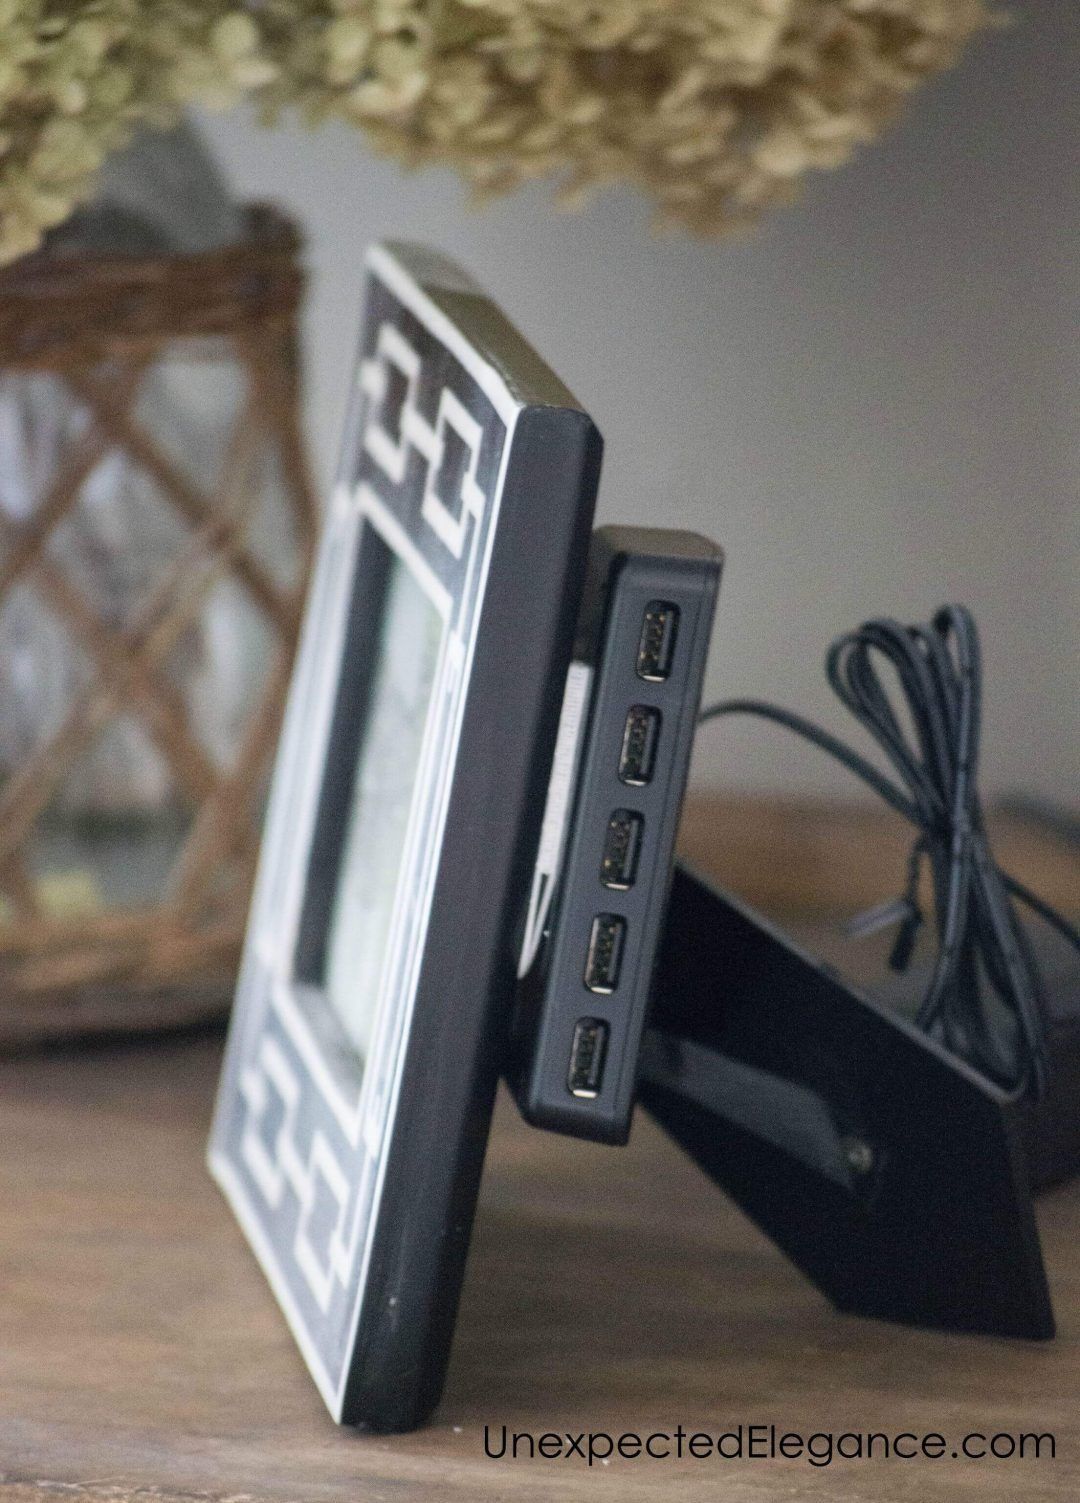 11 Diy Charging Station That Are Easy To Make - 918Fec7Abbba45B396B372D268Dd9809